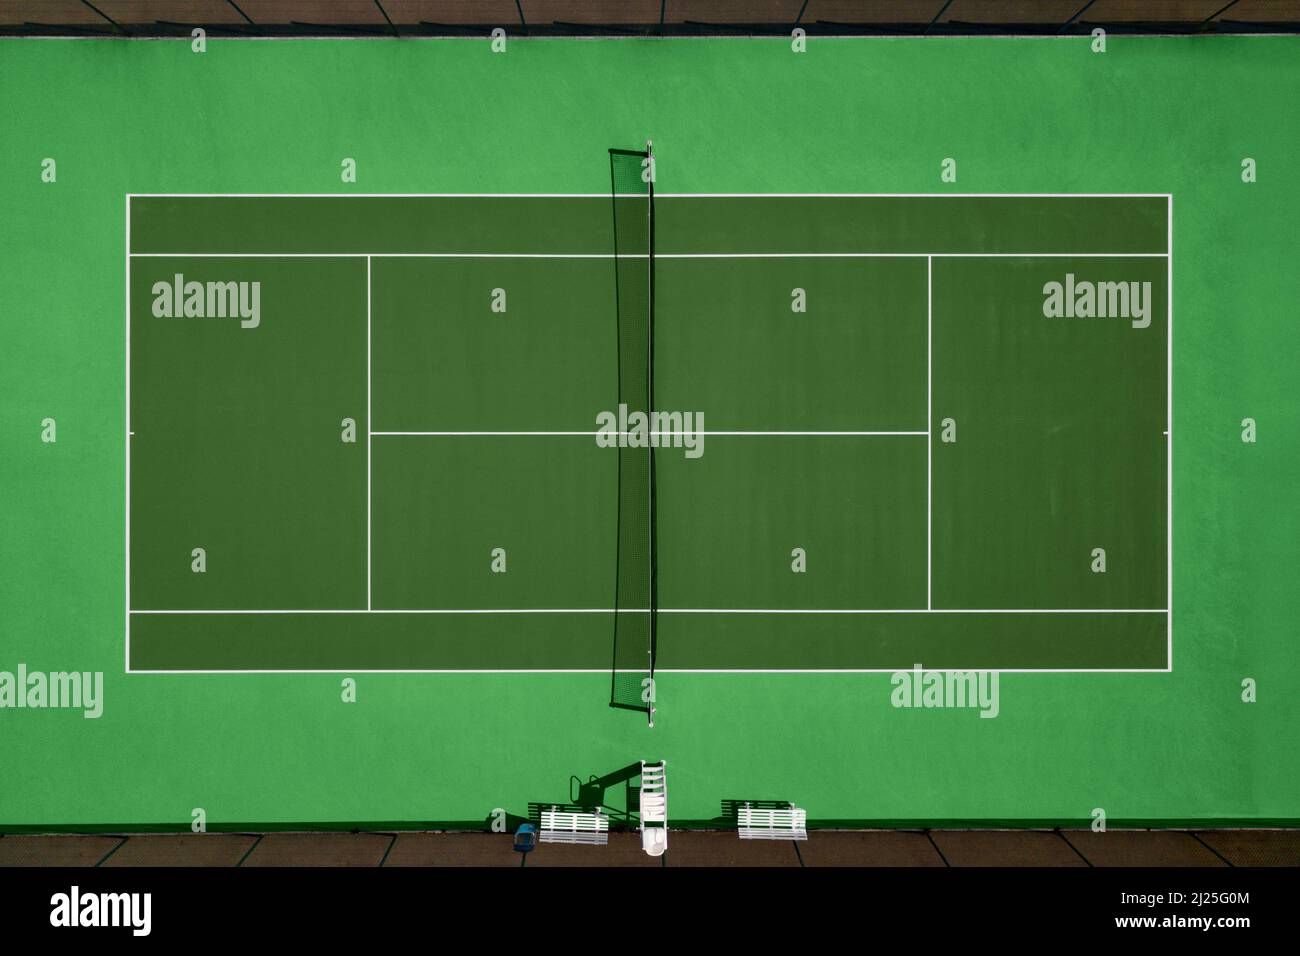 Aerial view of green tennis hard court. Stock Photo